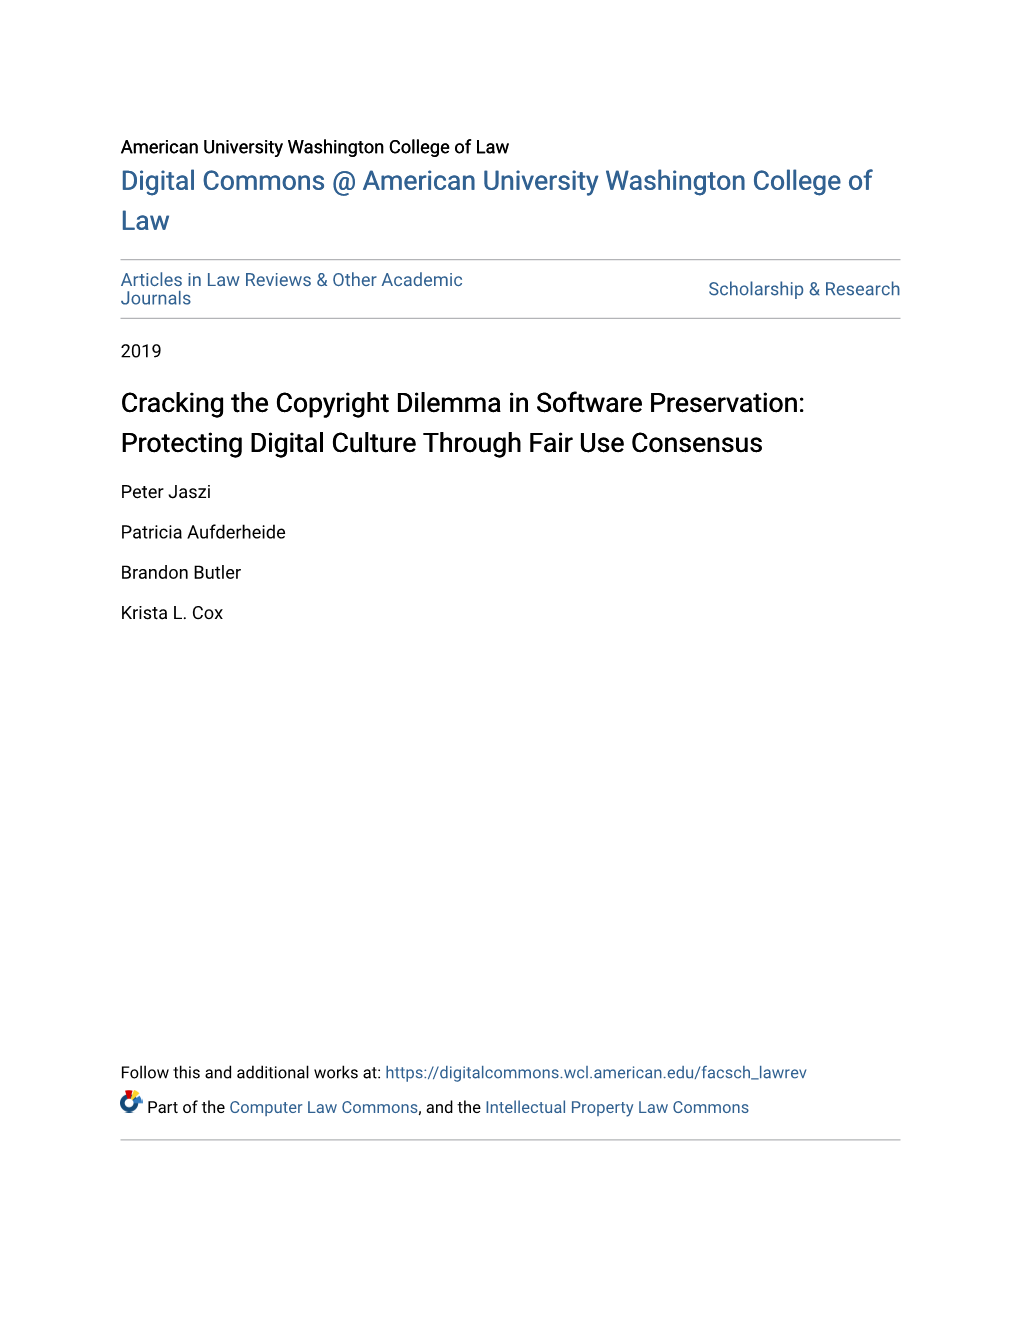 Cracking the Copyright Dilemma in Software Preservation: Protecting Digital Culture Through Fair Use Consensus